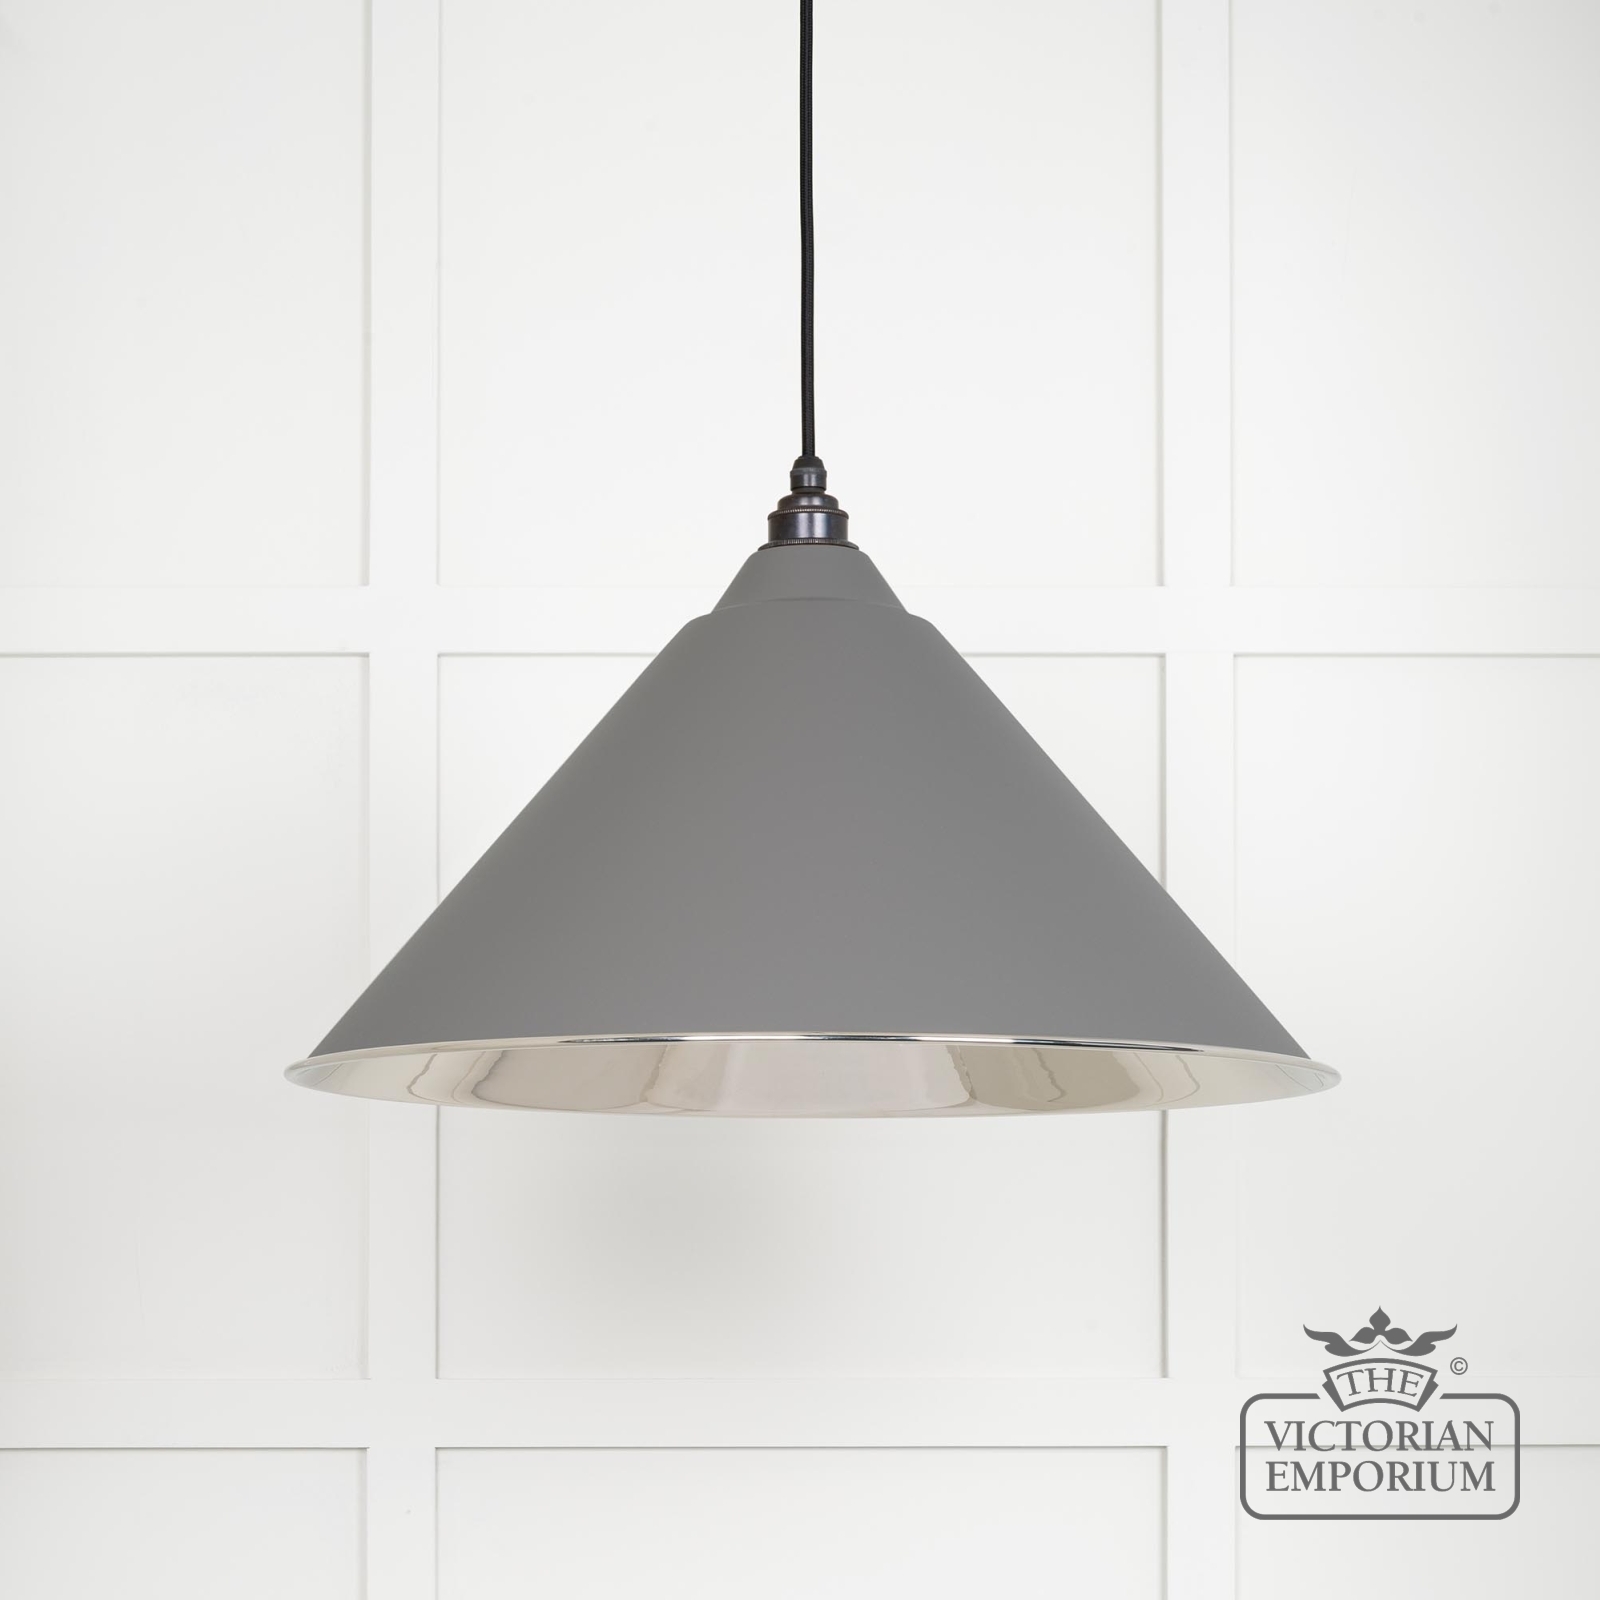 Hockliffe Pendant Light in Smooth Nickel and Bluff Exterior